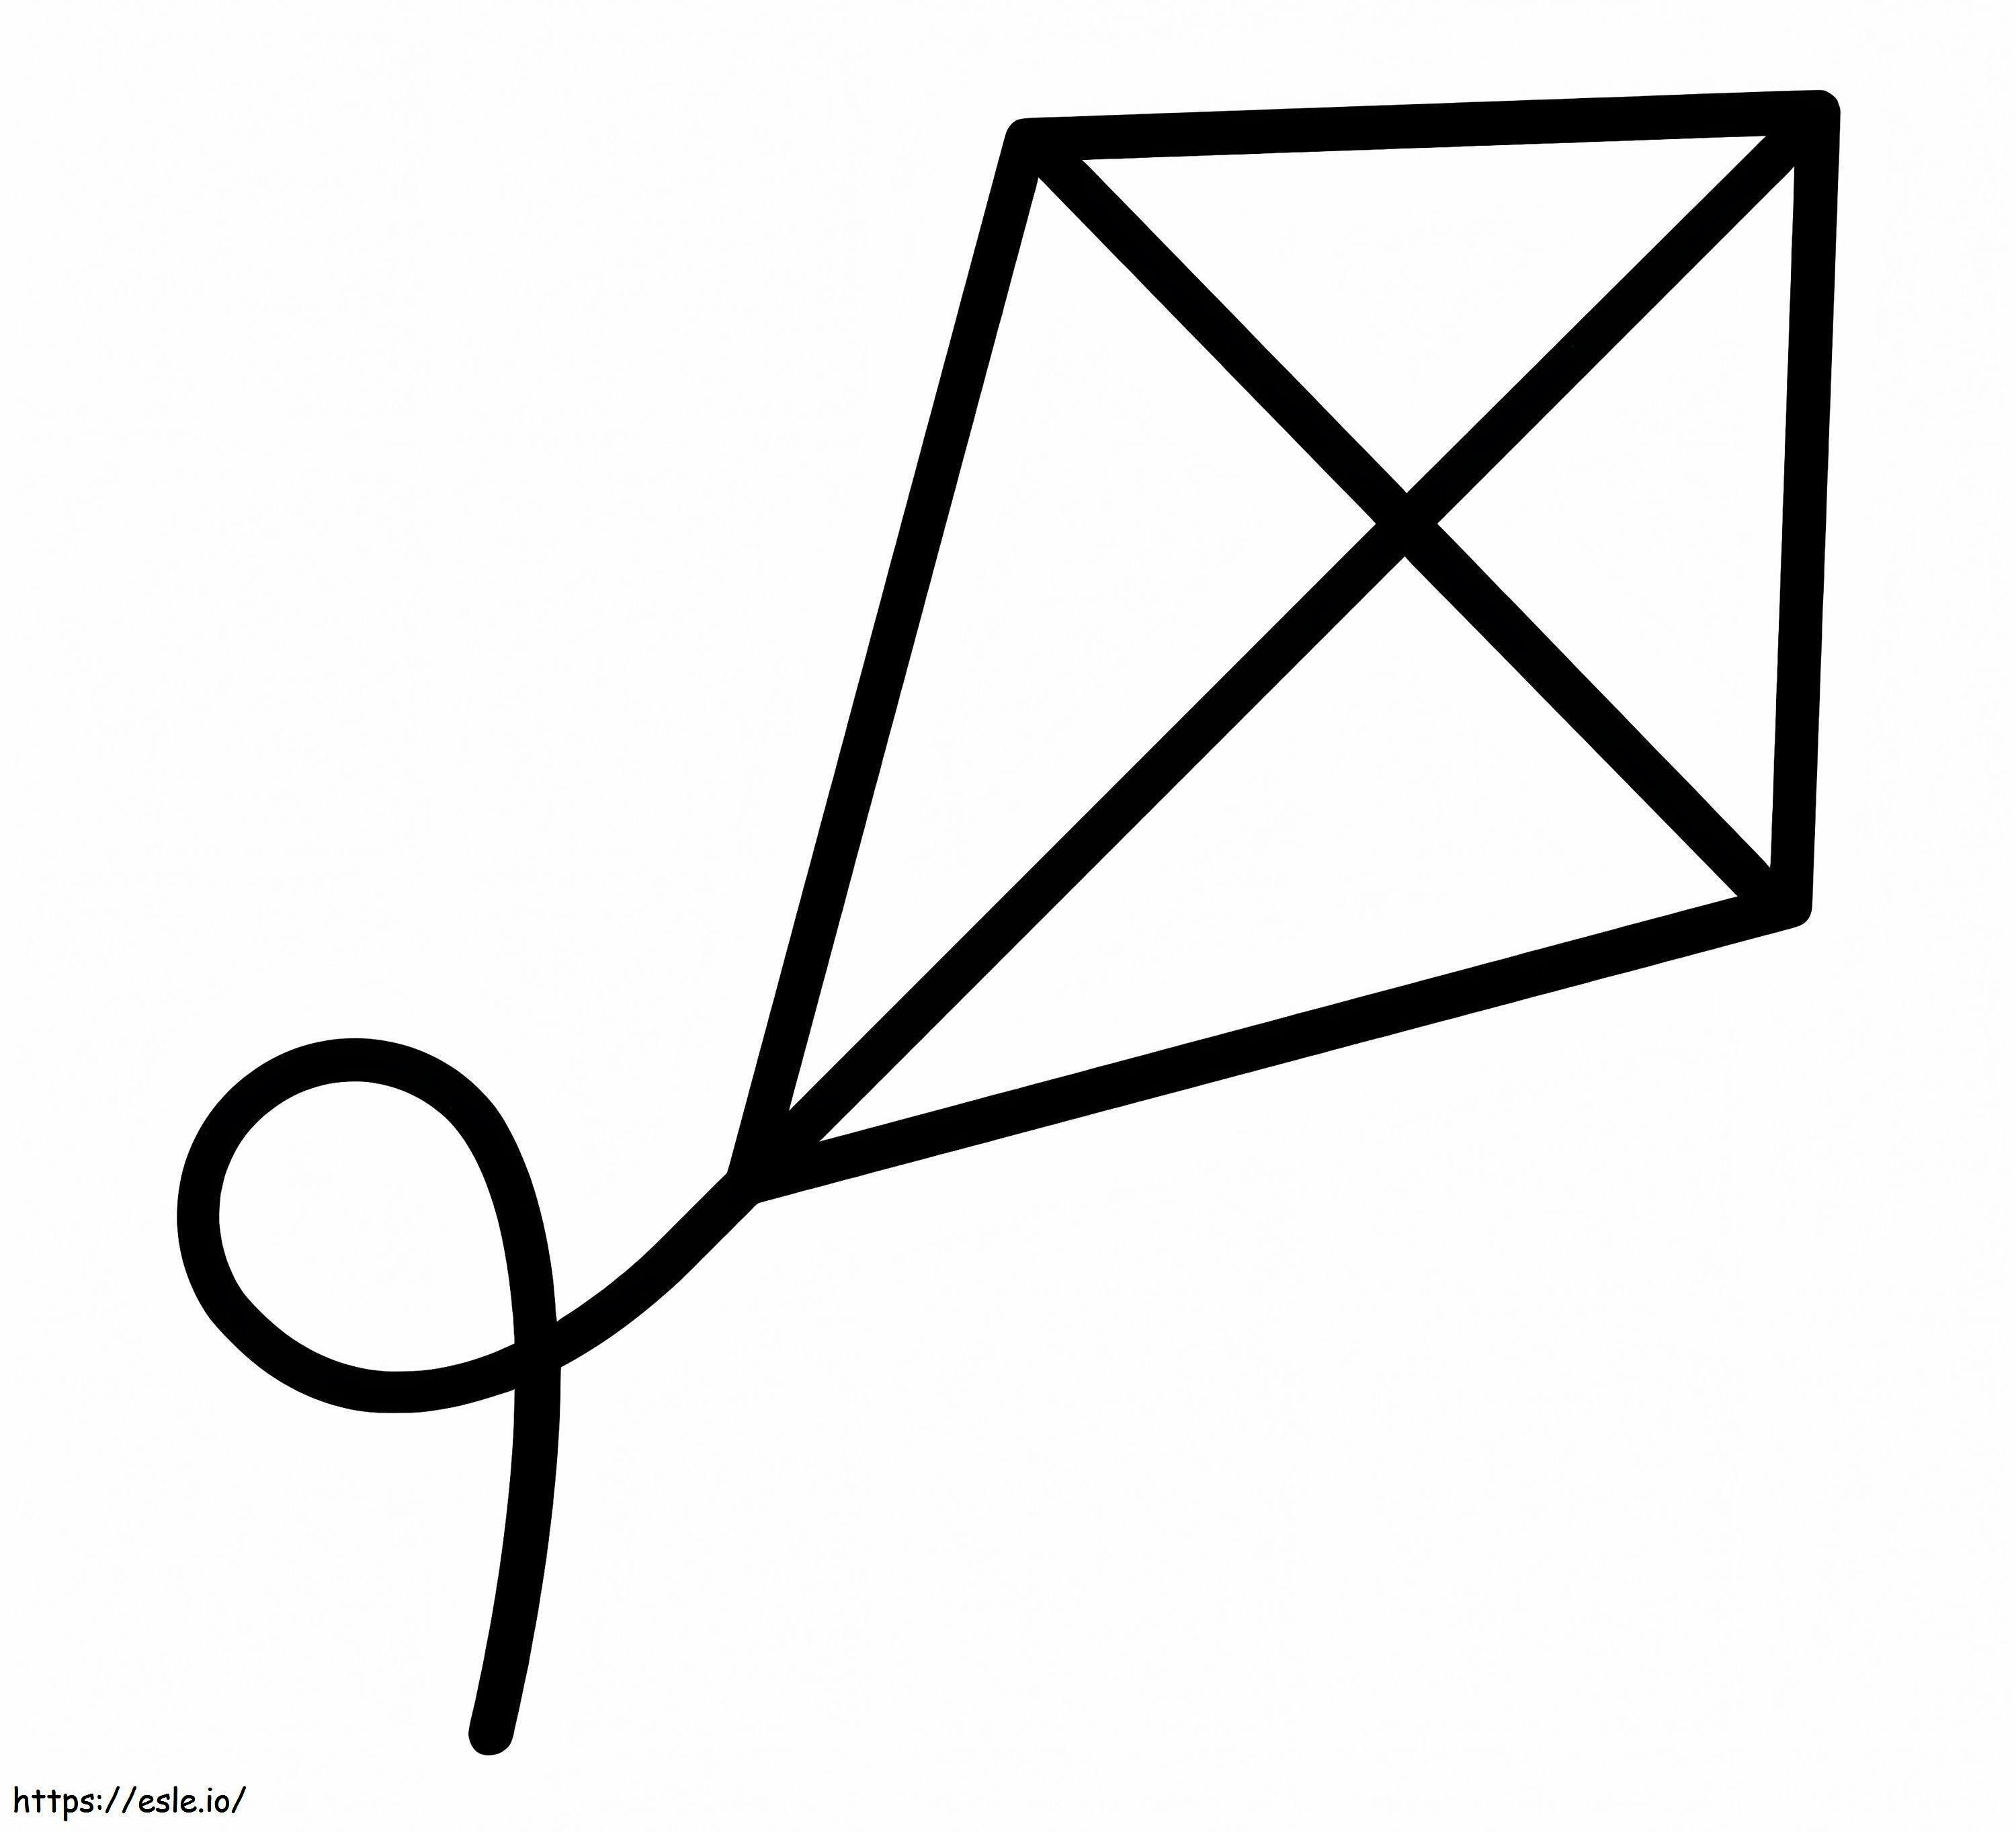 A Simple Kite coloring page